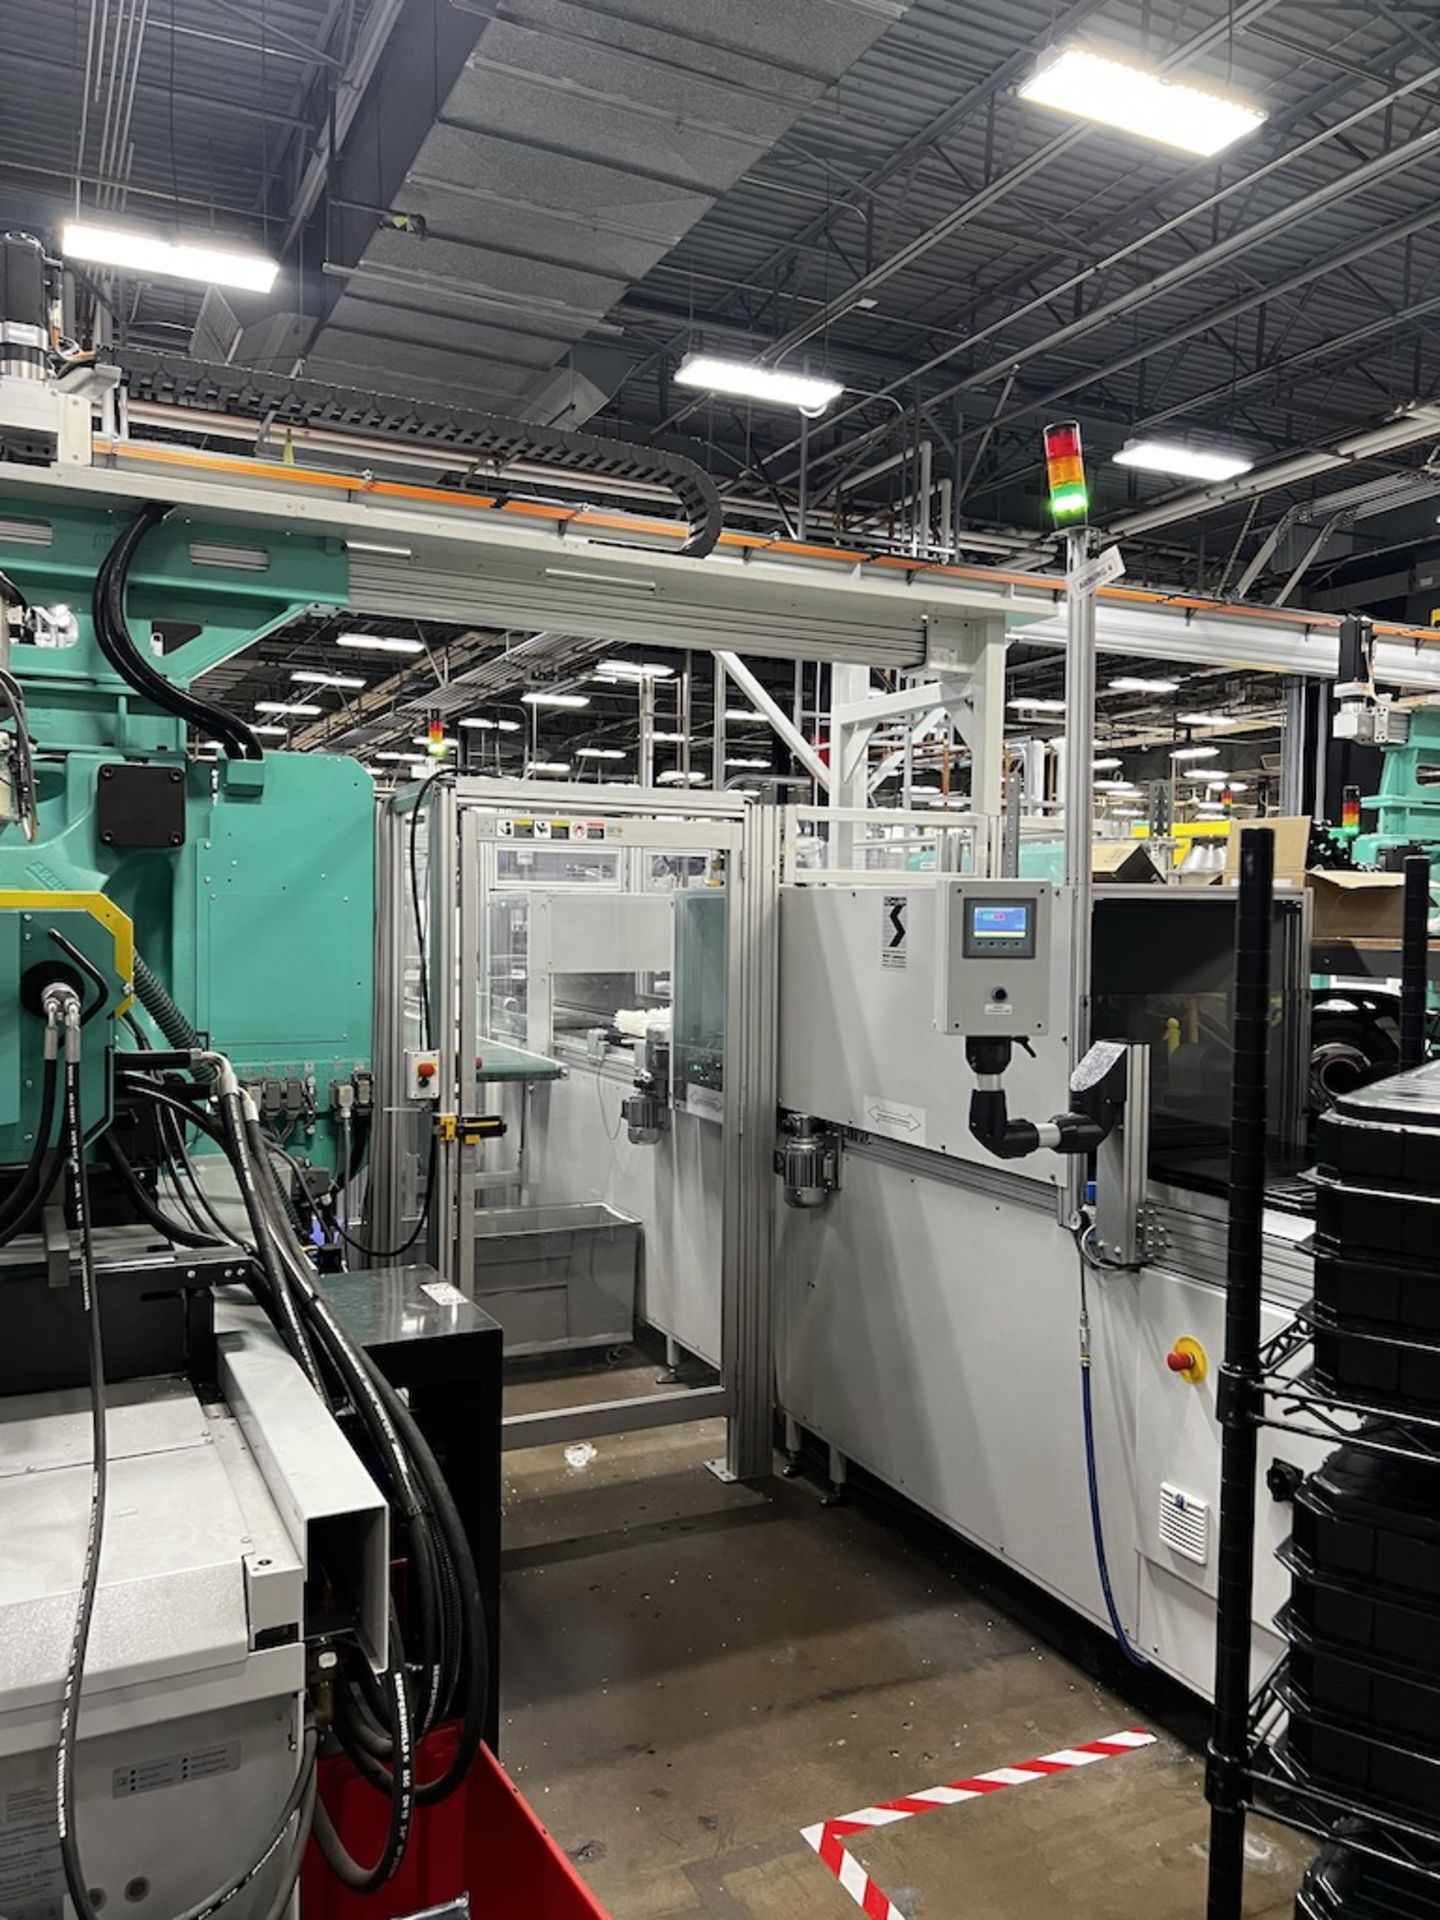 Arburg 320 Ton Injection Molding Press w/Integrated Arburg Robot, New in 2014 - Image 3 of 4